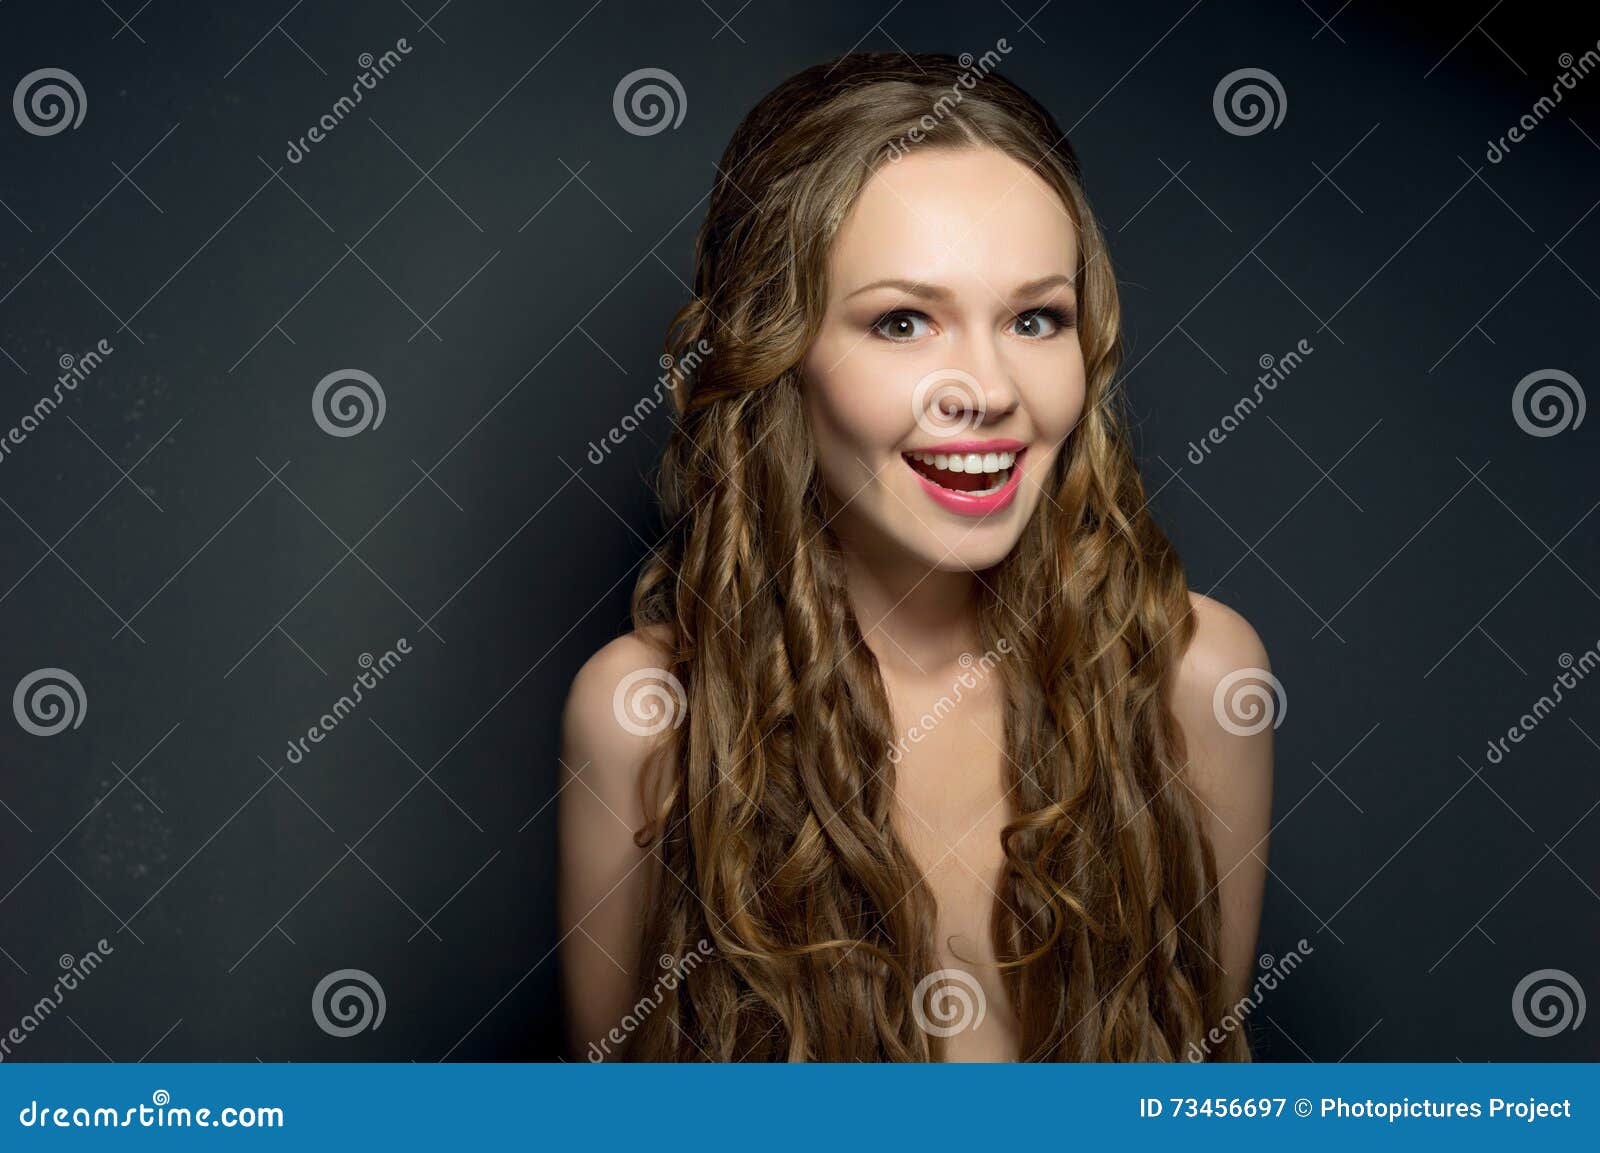 portrait of a glad beautiful young woman on dark background.